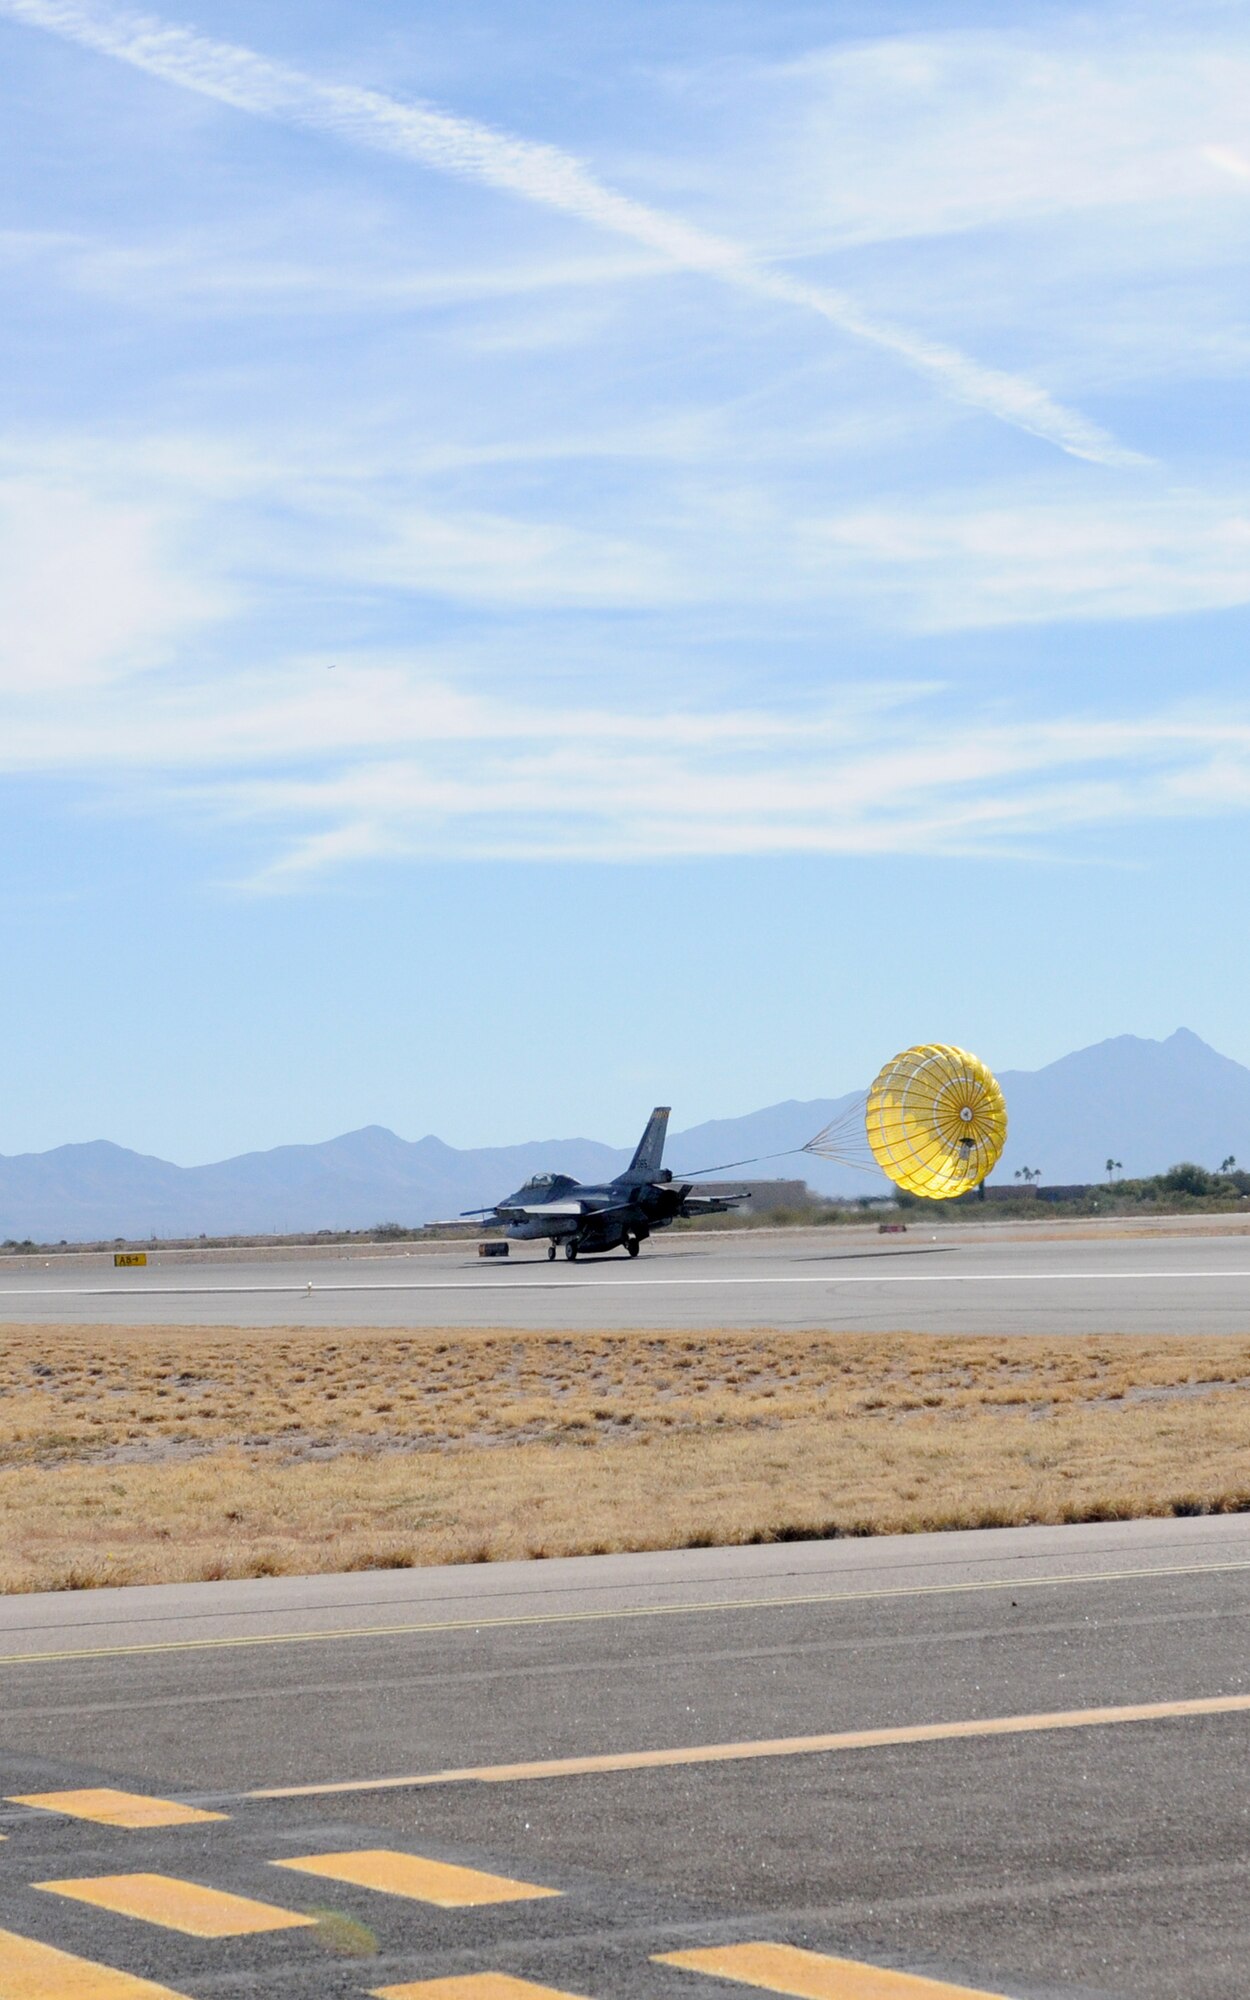 A Royal Netherland’s Air Force F-16 assigned to the Arizona Air National Guard’s 162nd Fighter Wing at Tucson International Airport lands here Friday, Dec. 10, using a drag chute. Chutes are typically employed by Dutch fighters as a safety feature for short field landings and adverse weather conditions. They can reduce the needed runway length by nearly 50 percent. U.S.-owned F-16s at the airport don’t use drag chutes, making this type of landing unique to the Dutch pilot training program here. (U.S. Air Force photo/Maj. Gabe Johnson)